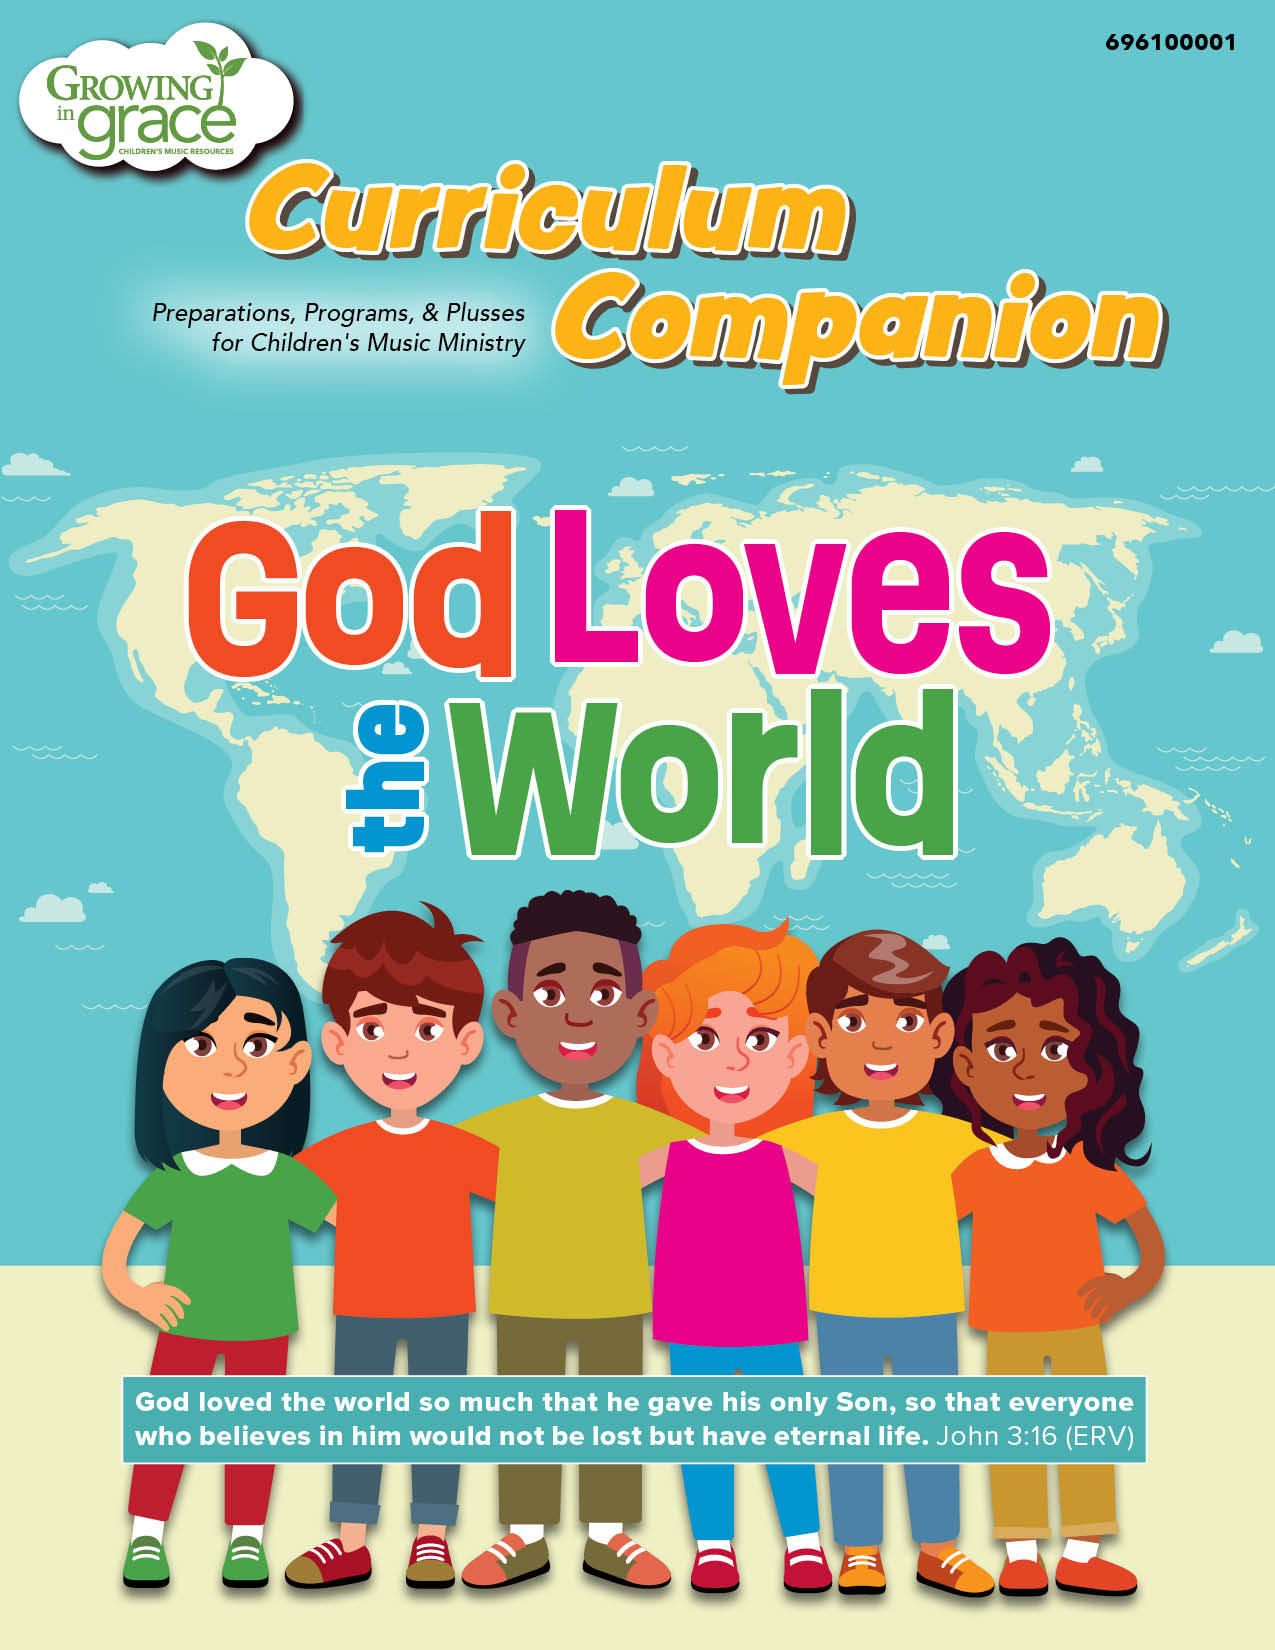 Growing in Grace God Loves the World Curriculum Companion (Digital)